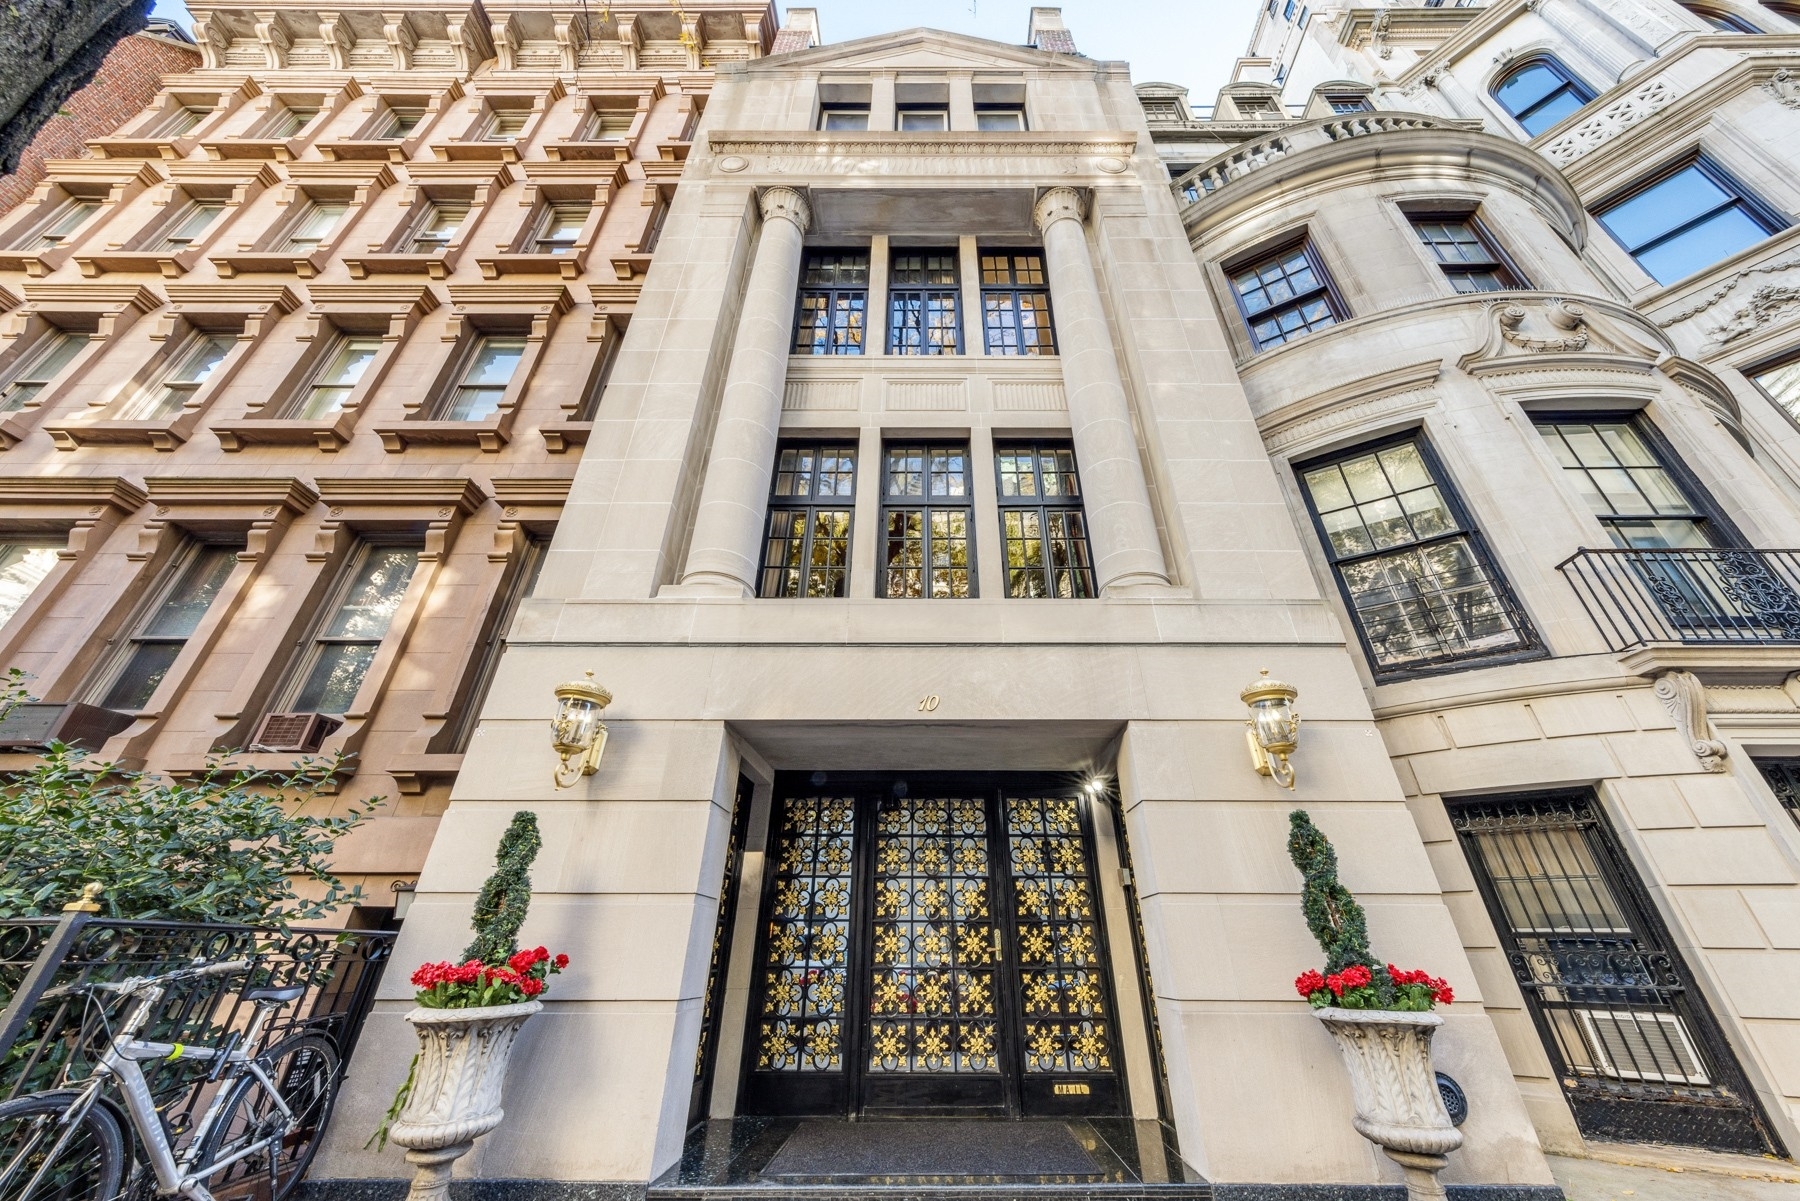 2. Single Family Townhouse for Sale at 10 E 64TH ST, TOWNHOUSE Lenox Hill, New York, New York 10065